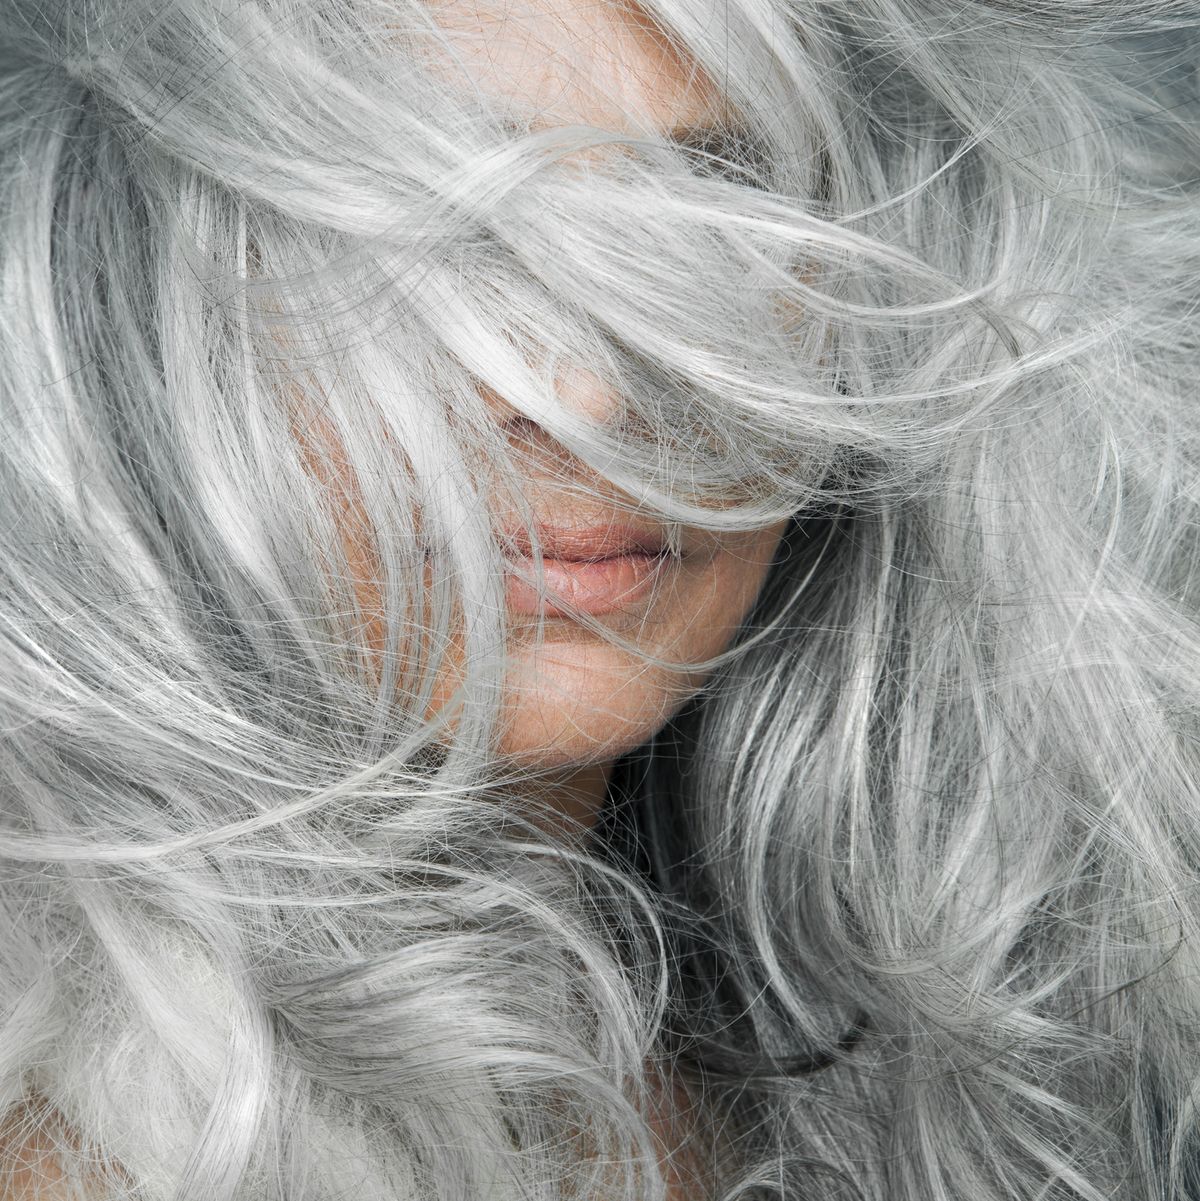 https://hips.hearstapps.com/hmg-prod/images/woman-with-grey-hair-blowing-across-her-face-royalty-free-image-1597686931.jpg?crop=0.66635xw:1xh;center,top&resize=1200:*